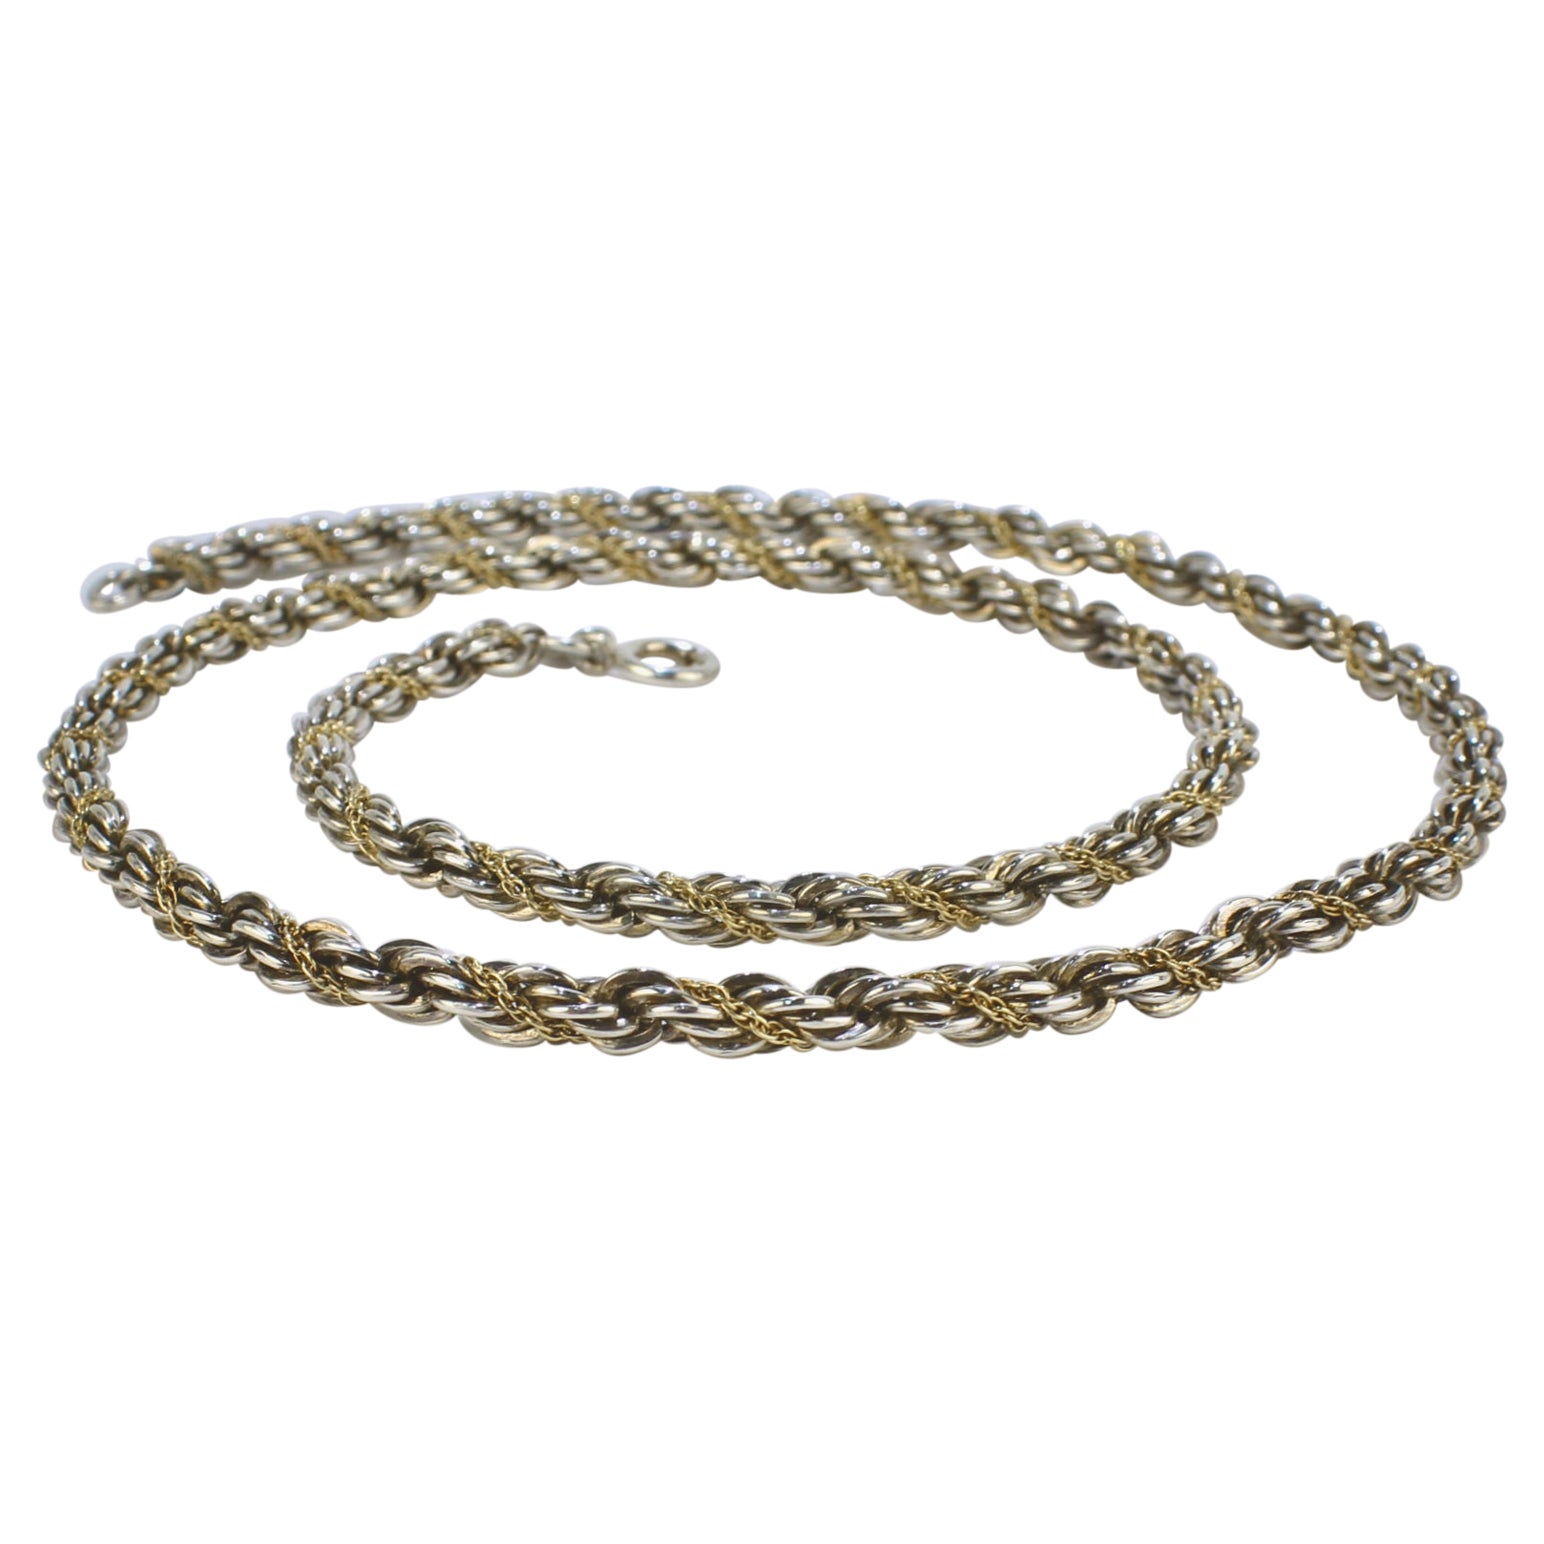 Tiffany & Co. 14k Gold and Sterling Silver Rope Twist Necklace